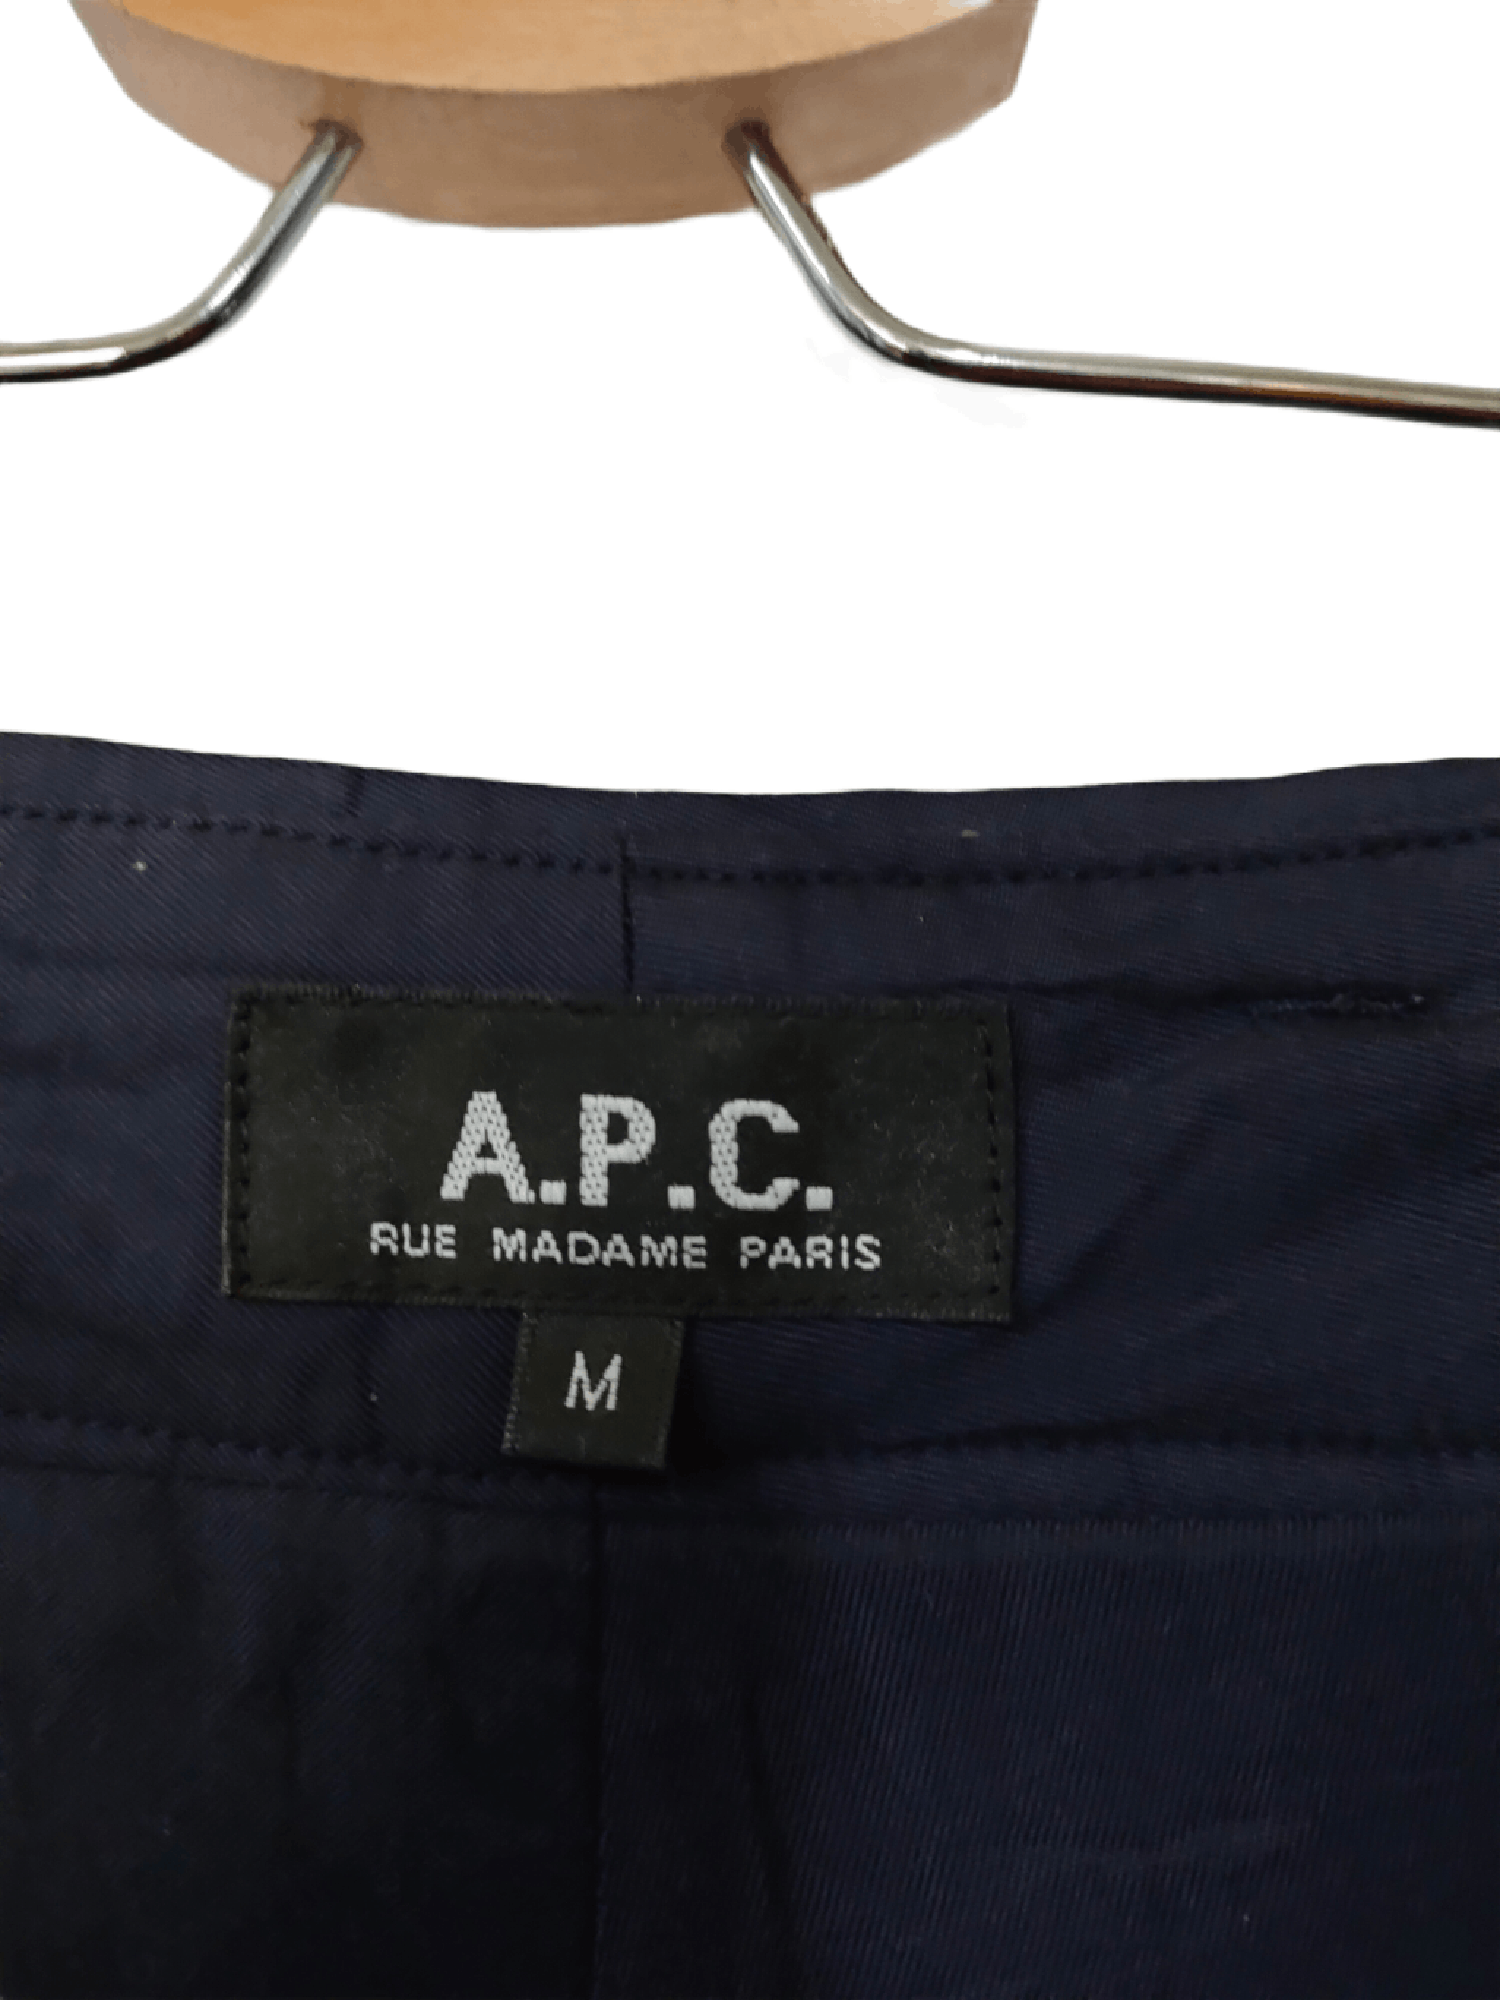 A.P.C. NEW WOOL NAVY BLUE CASUAL PANTS - 6